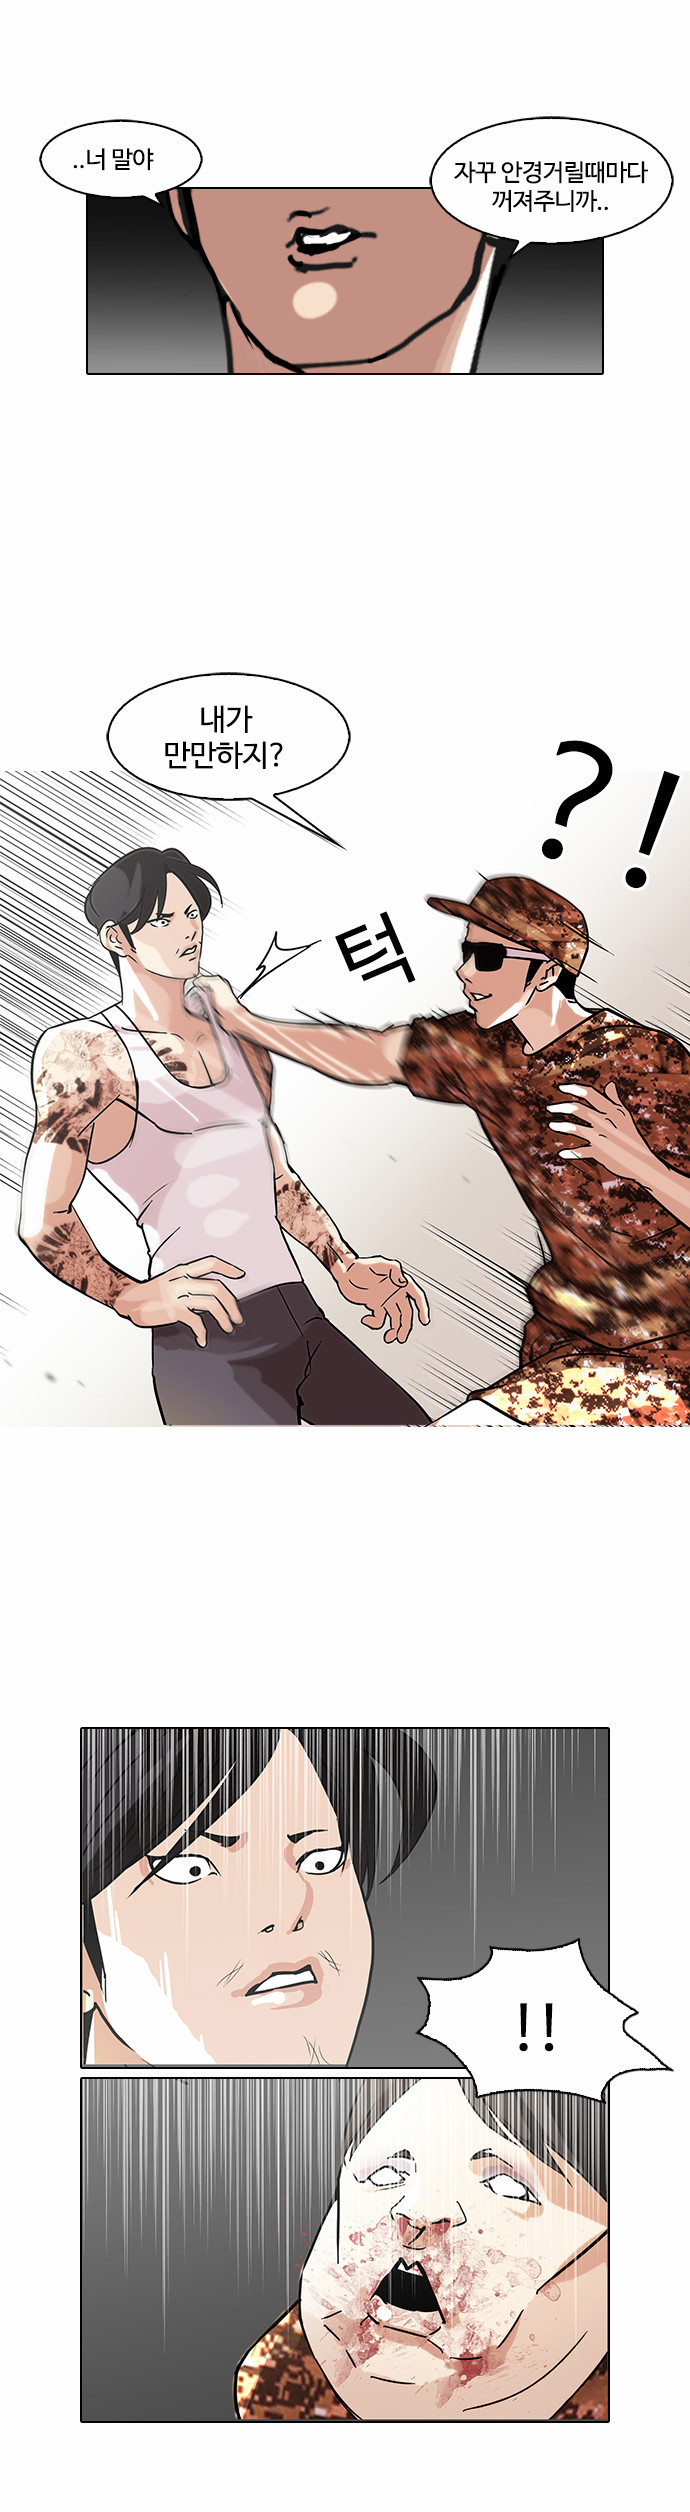 Lookism - Chapter 93 - Page 3